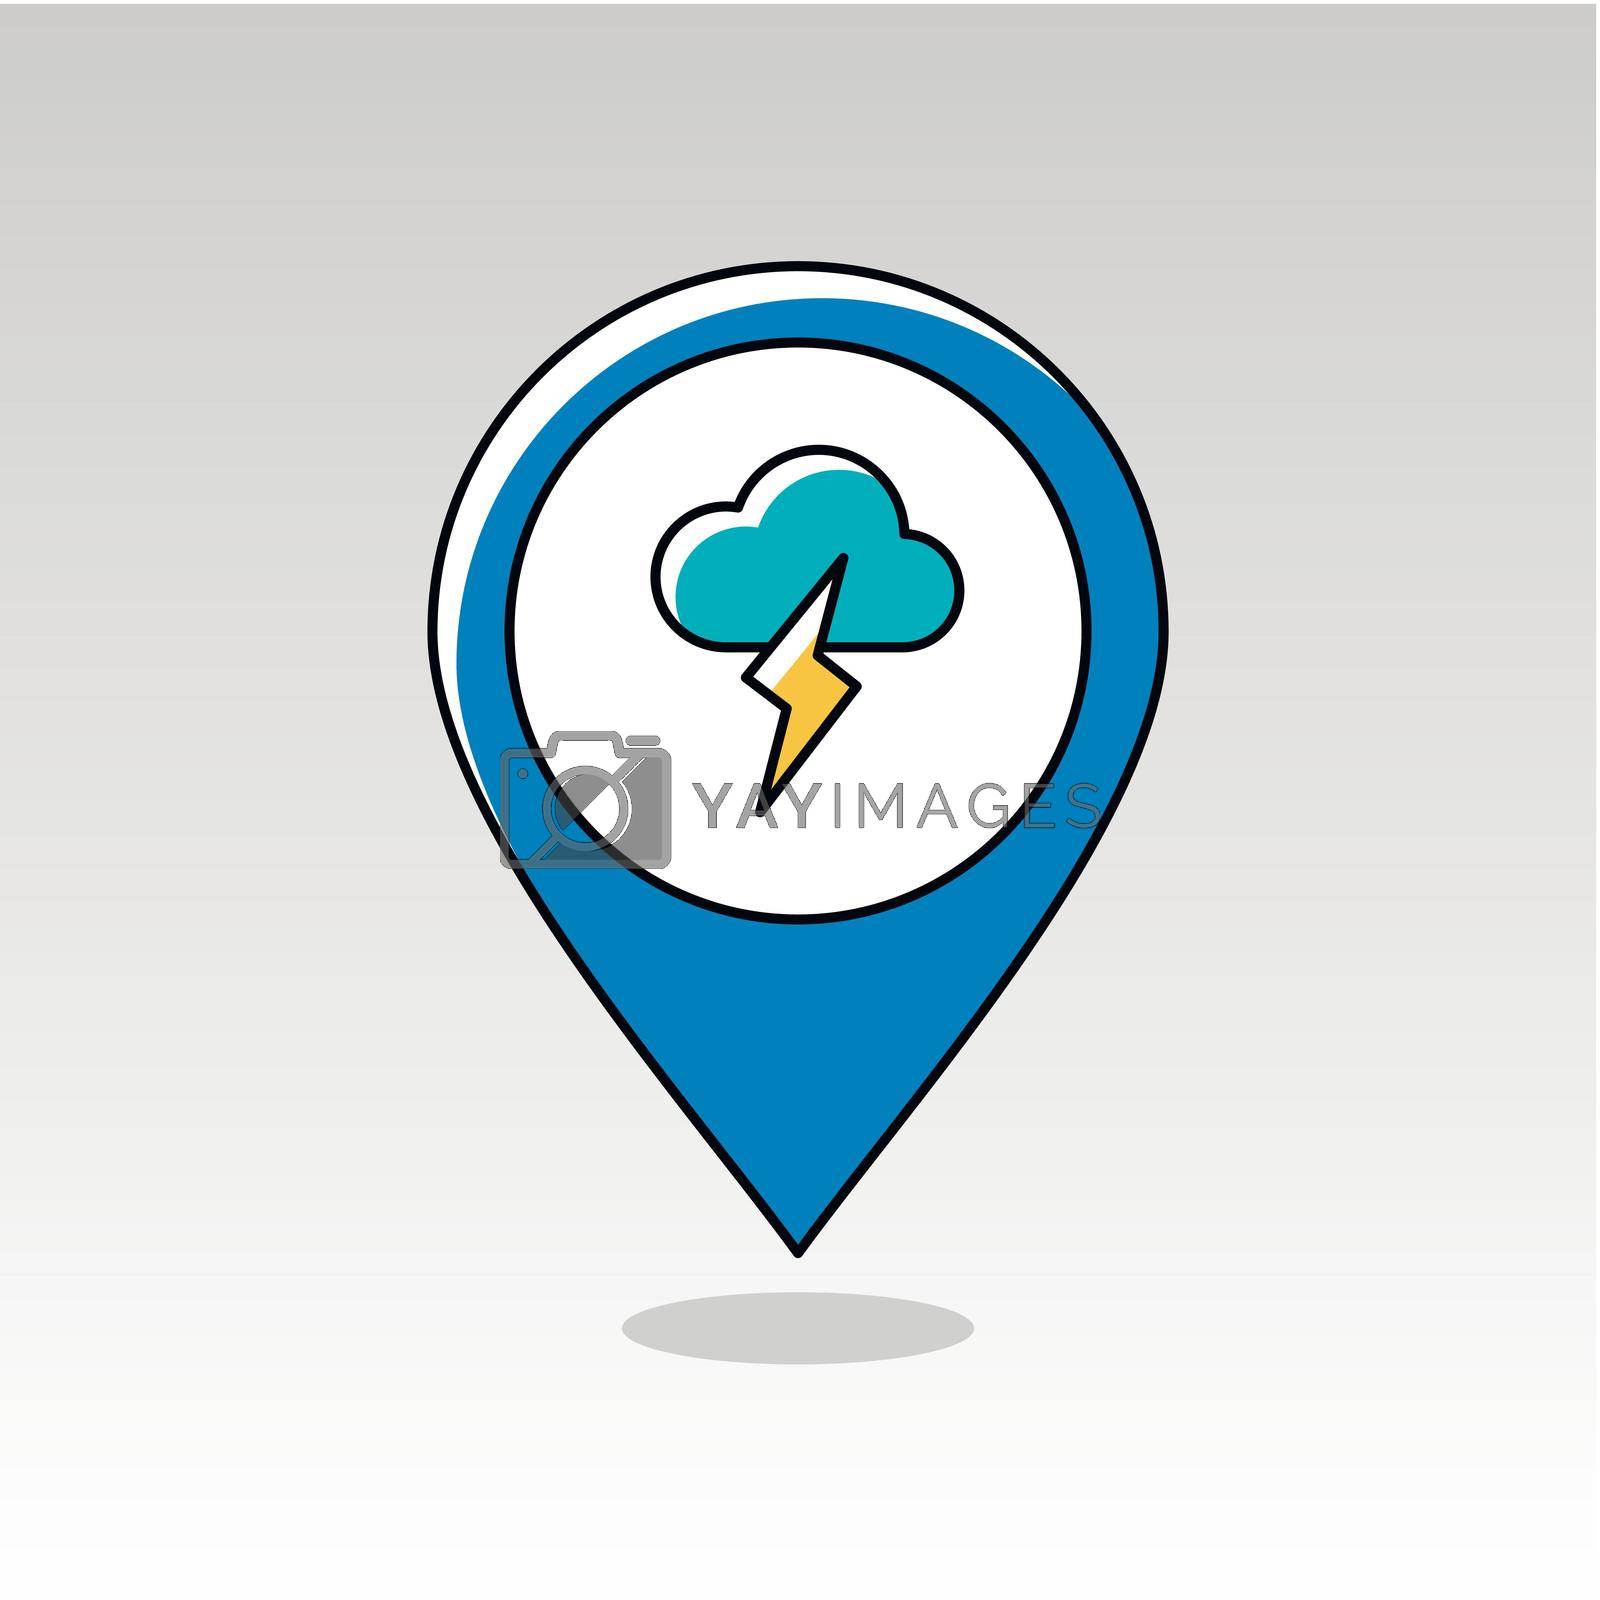 Cloud Lightning outline pin map icon. Map pointer. Map markers. Meteorology. Weather. Vector illustration eps 10